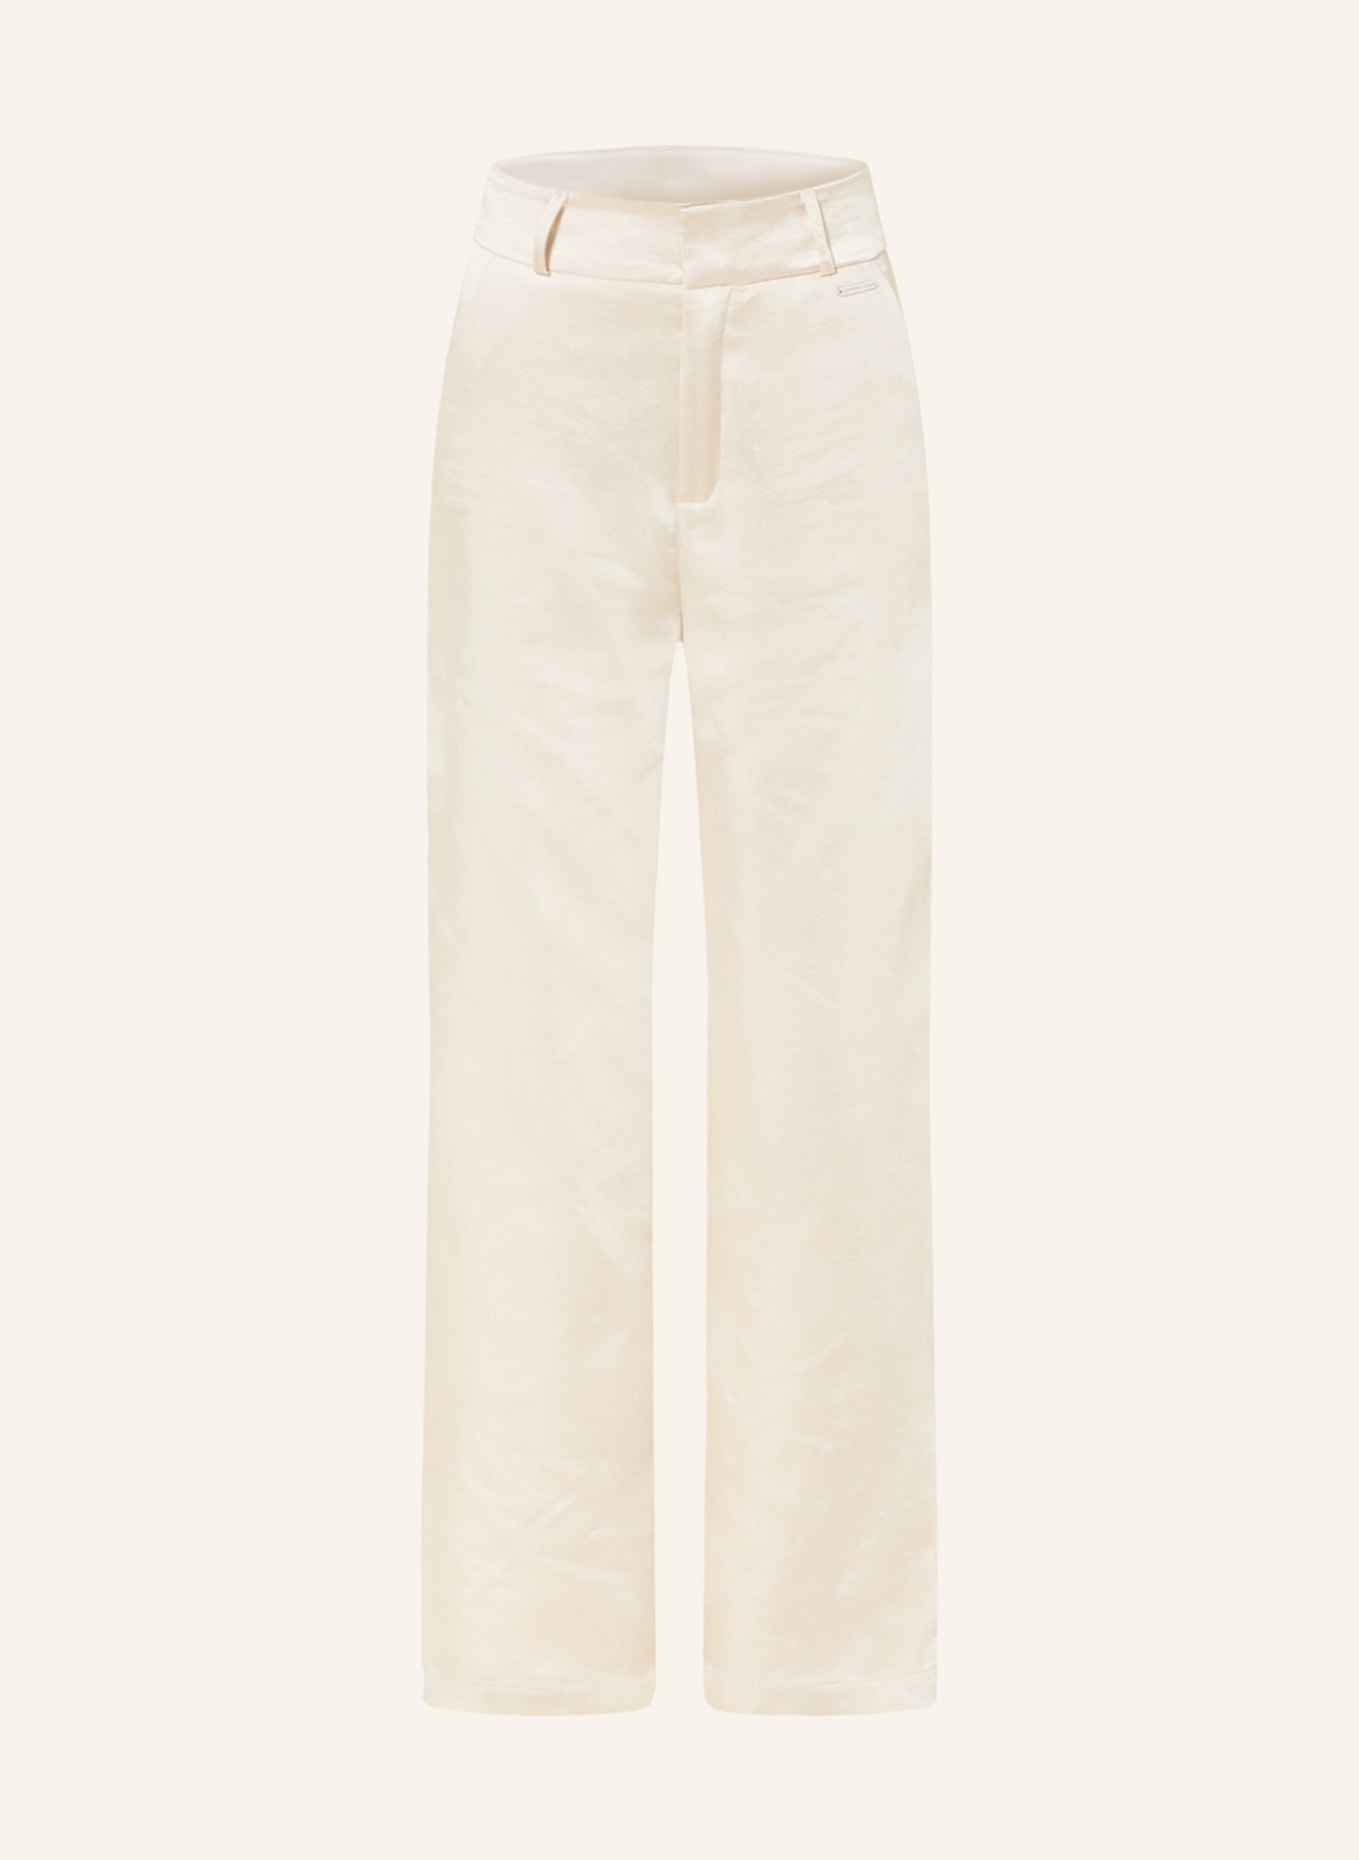 COLOURFUL REBEL Wide leg trousers PIPPI made of satin, Color: CREAM (Image 1)